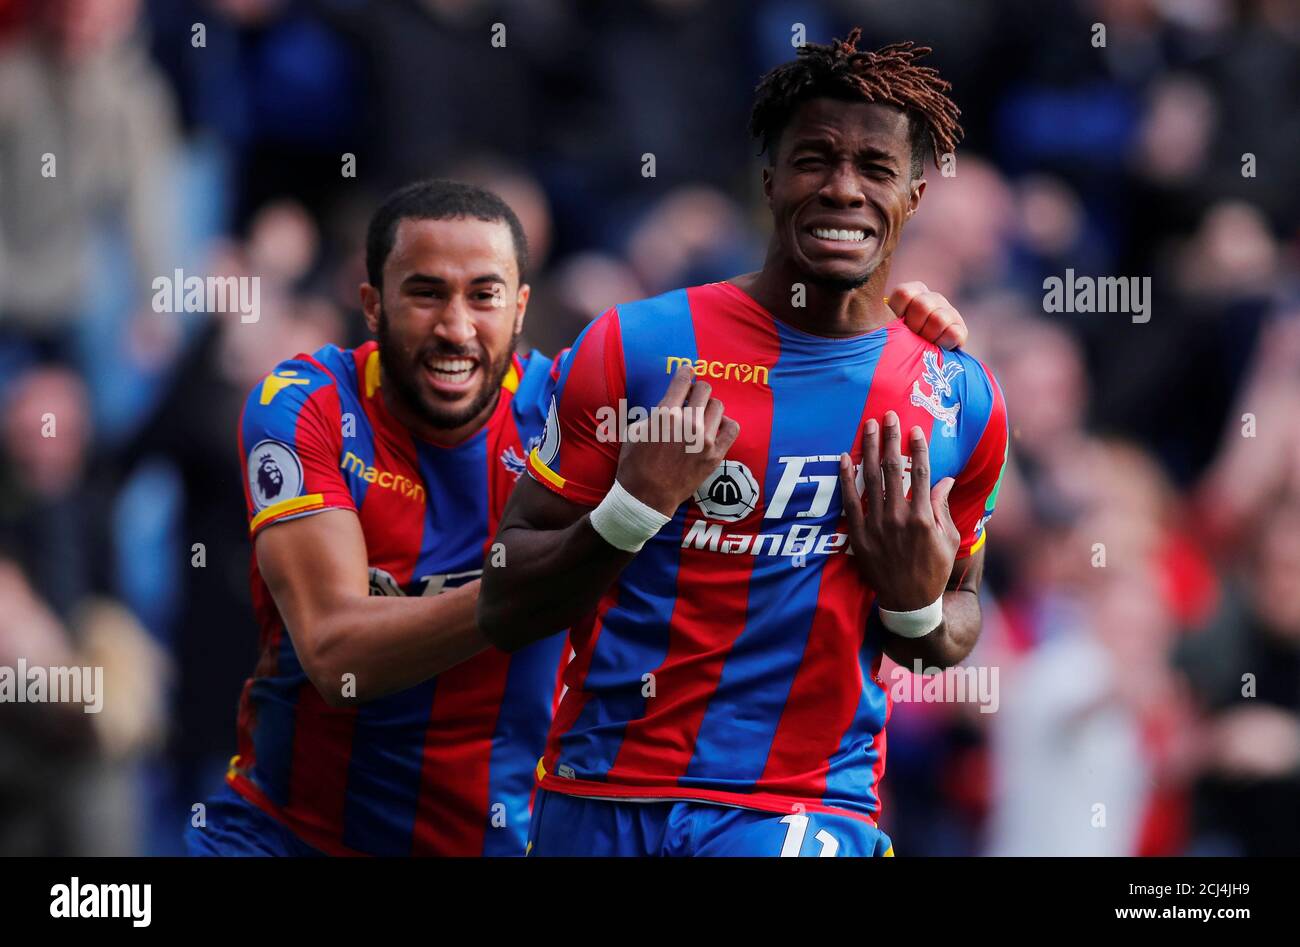 Soccer Football - Premier League - Crystal Palace vs West Ham United - Selhurst Park, London, Britain - October 28, 2017   Crystal Palace's Wilfried Zaha celebrates scoring their second goal    REUTERS/Eddie Keogh    EDITORIAL USE ONLY. No use with unauthorized audio, video, data, fixture lists, club/league logos or 'live' services. Online in-match use limited to 75 images, no video emulation. No use in betting, games or single club/league/player publications. Please contact your account representative for further details.? Stock Photo